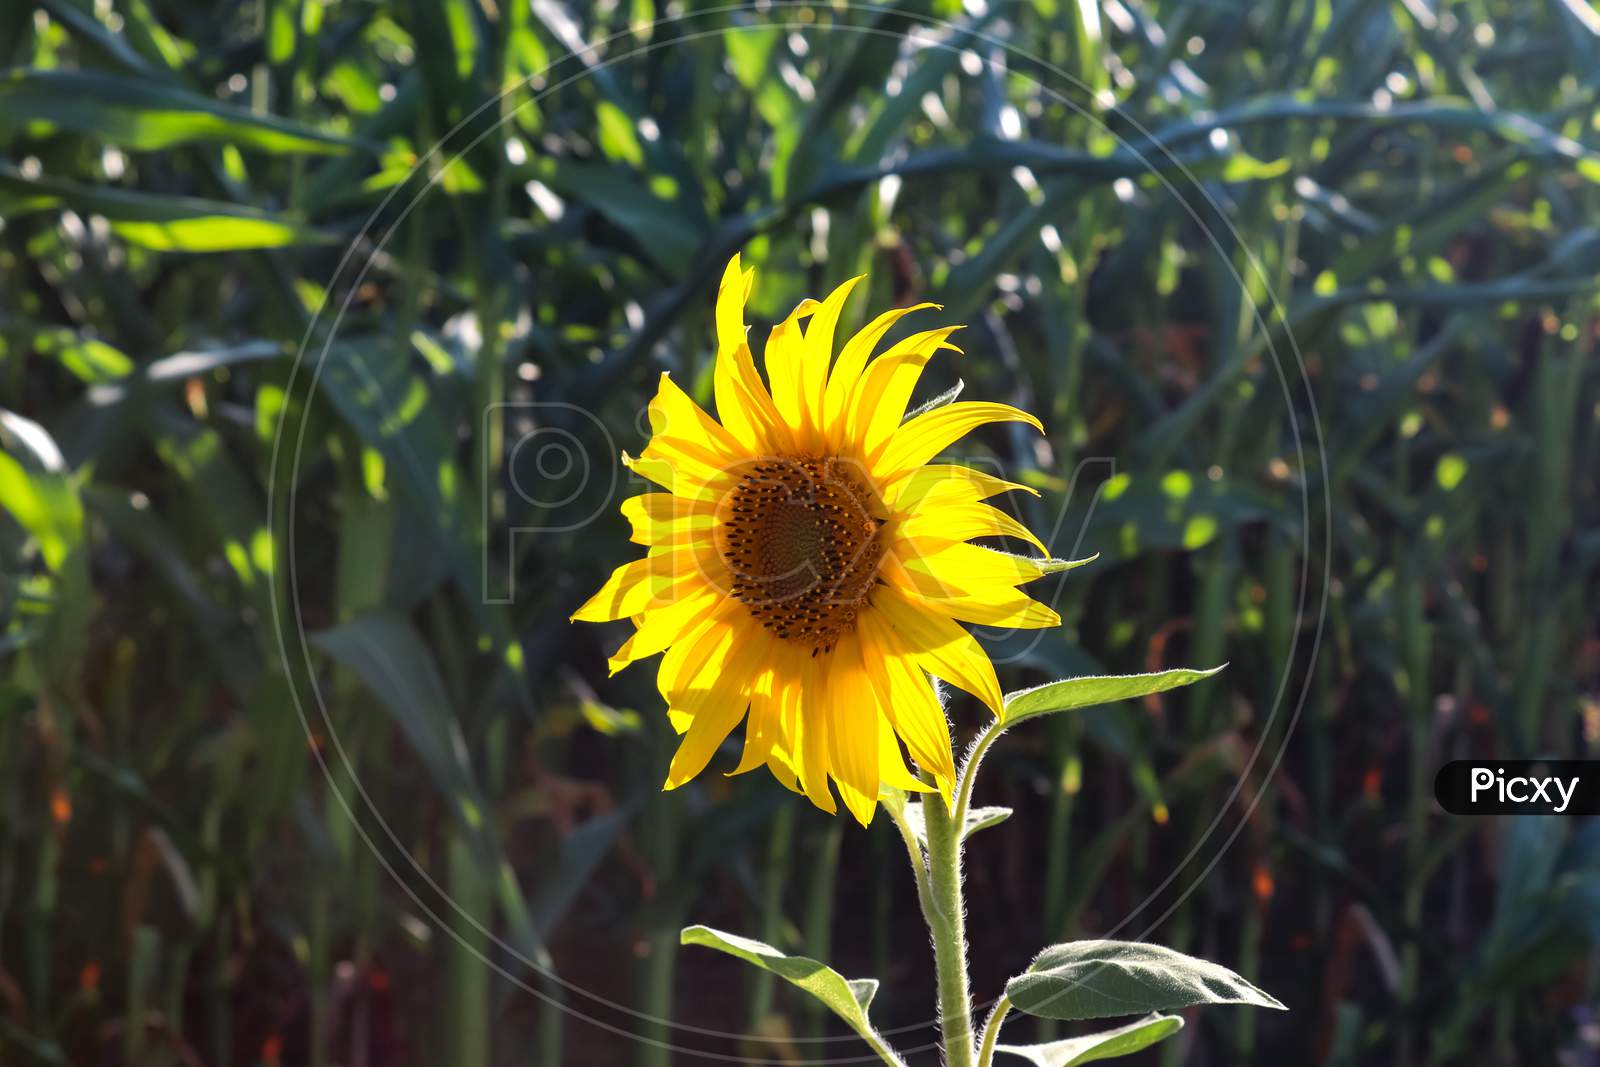 Sunflowers In Front Of A Crop Field By The Roadside Against The Sun